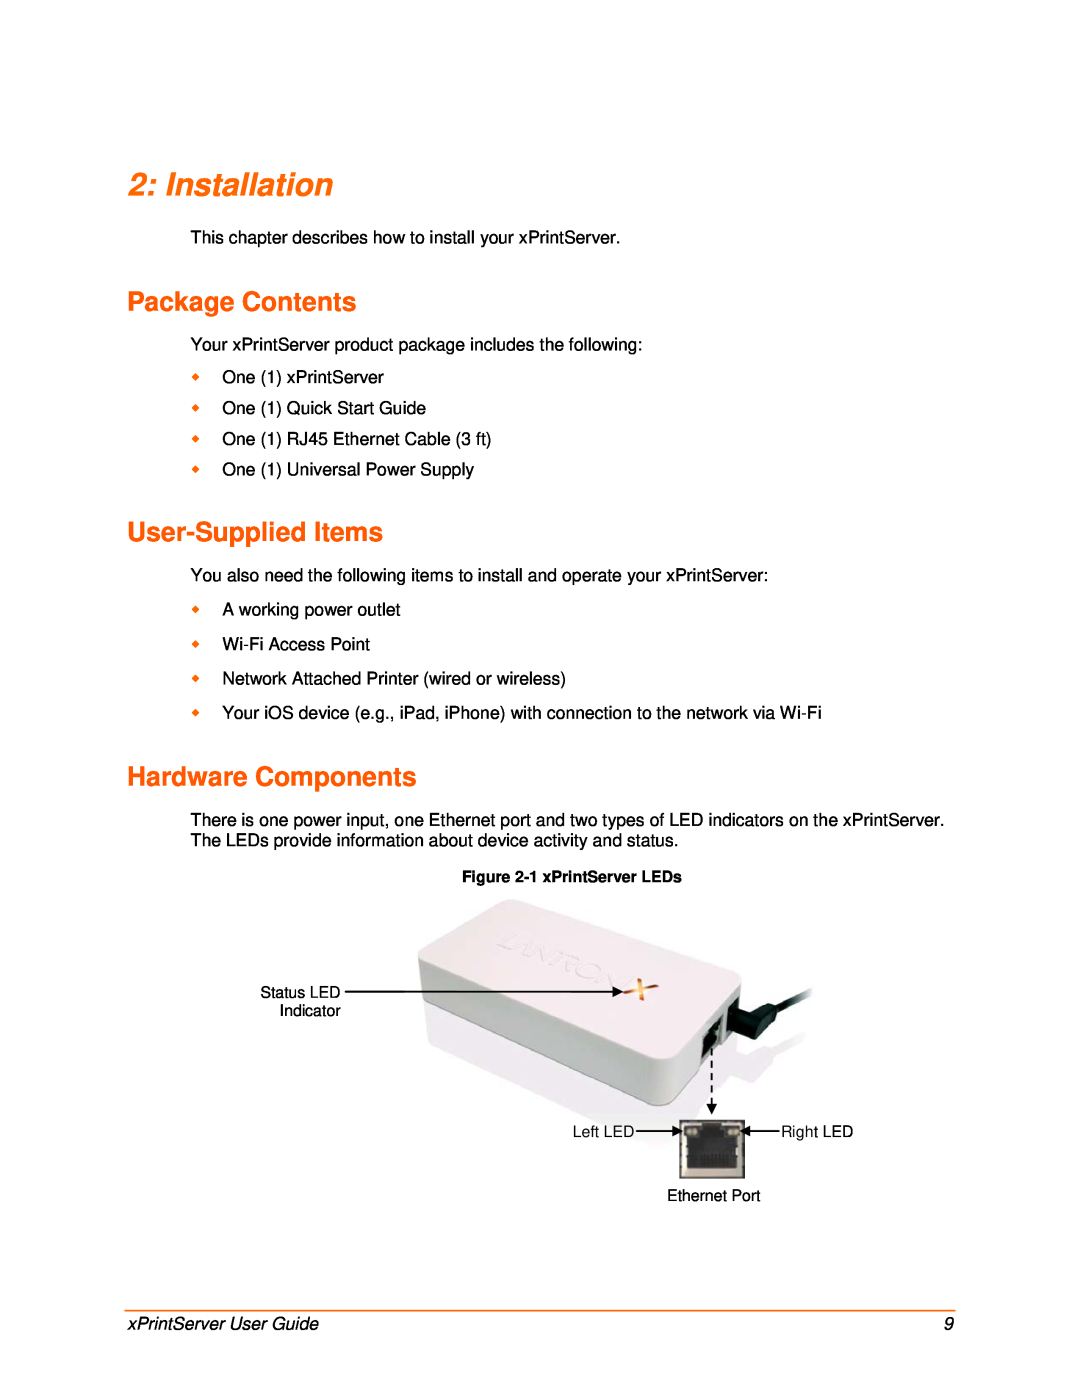 Lantronix 900-603 manual Installation, Package Contents, User-Supplied Items, Hardware Components, xPrintServer User Guide 